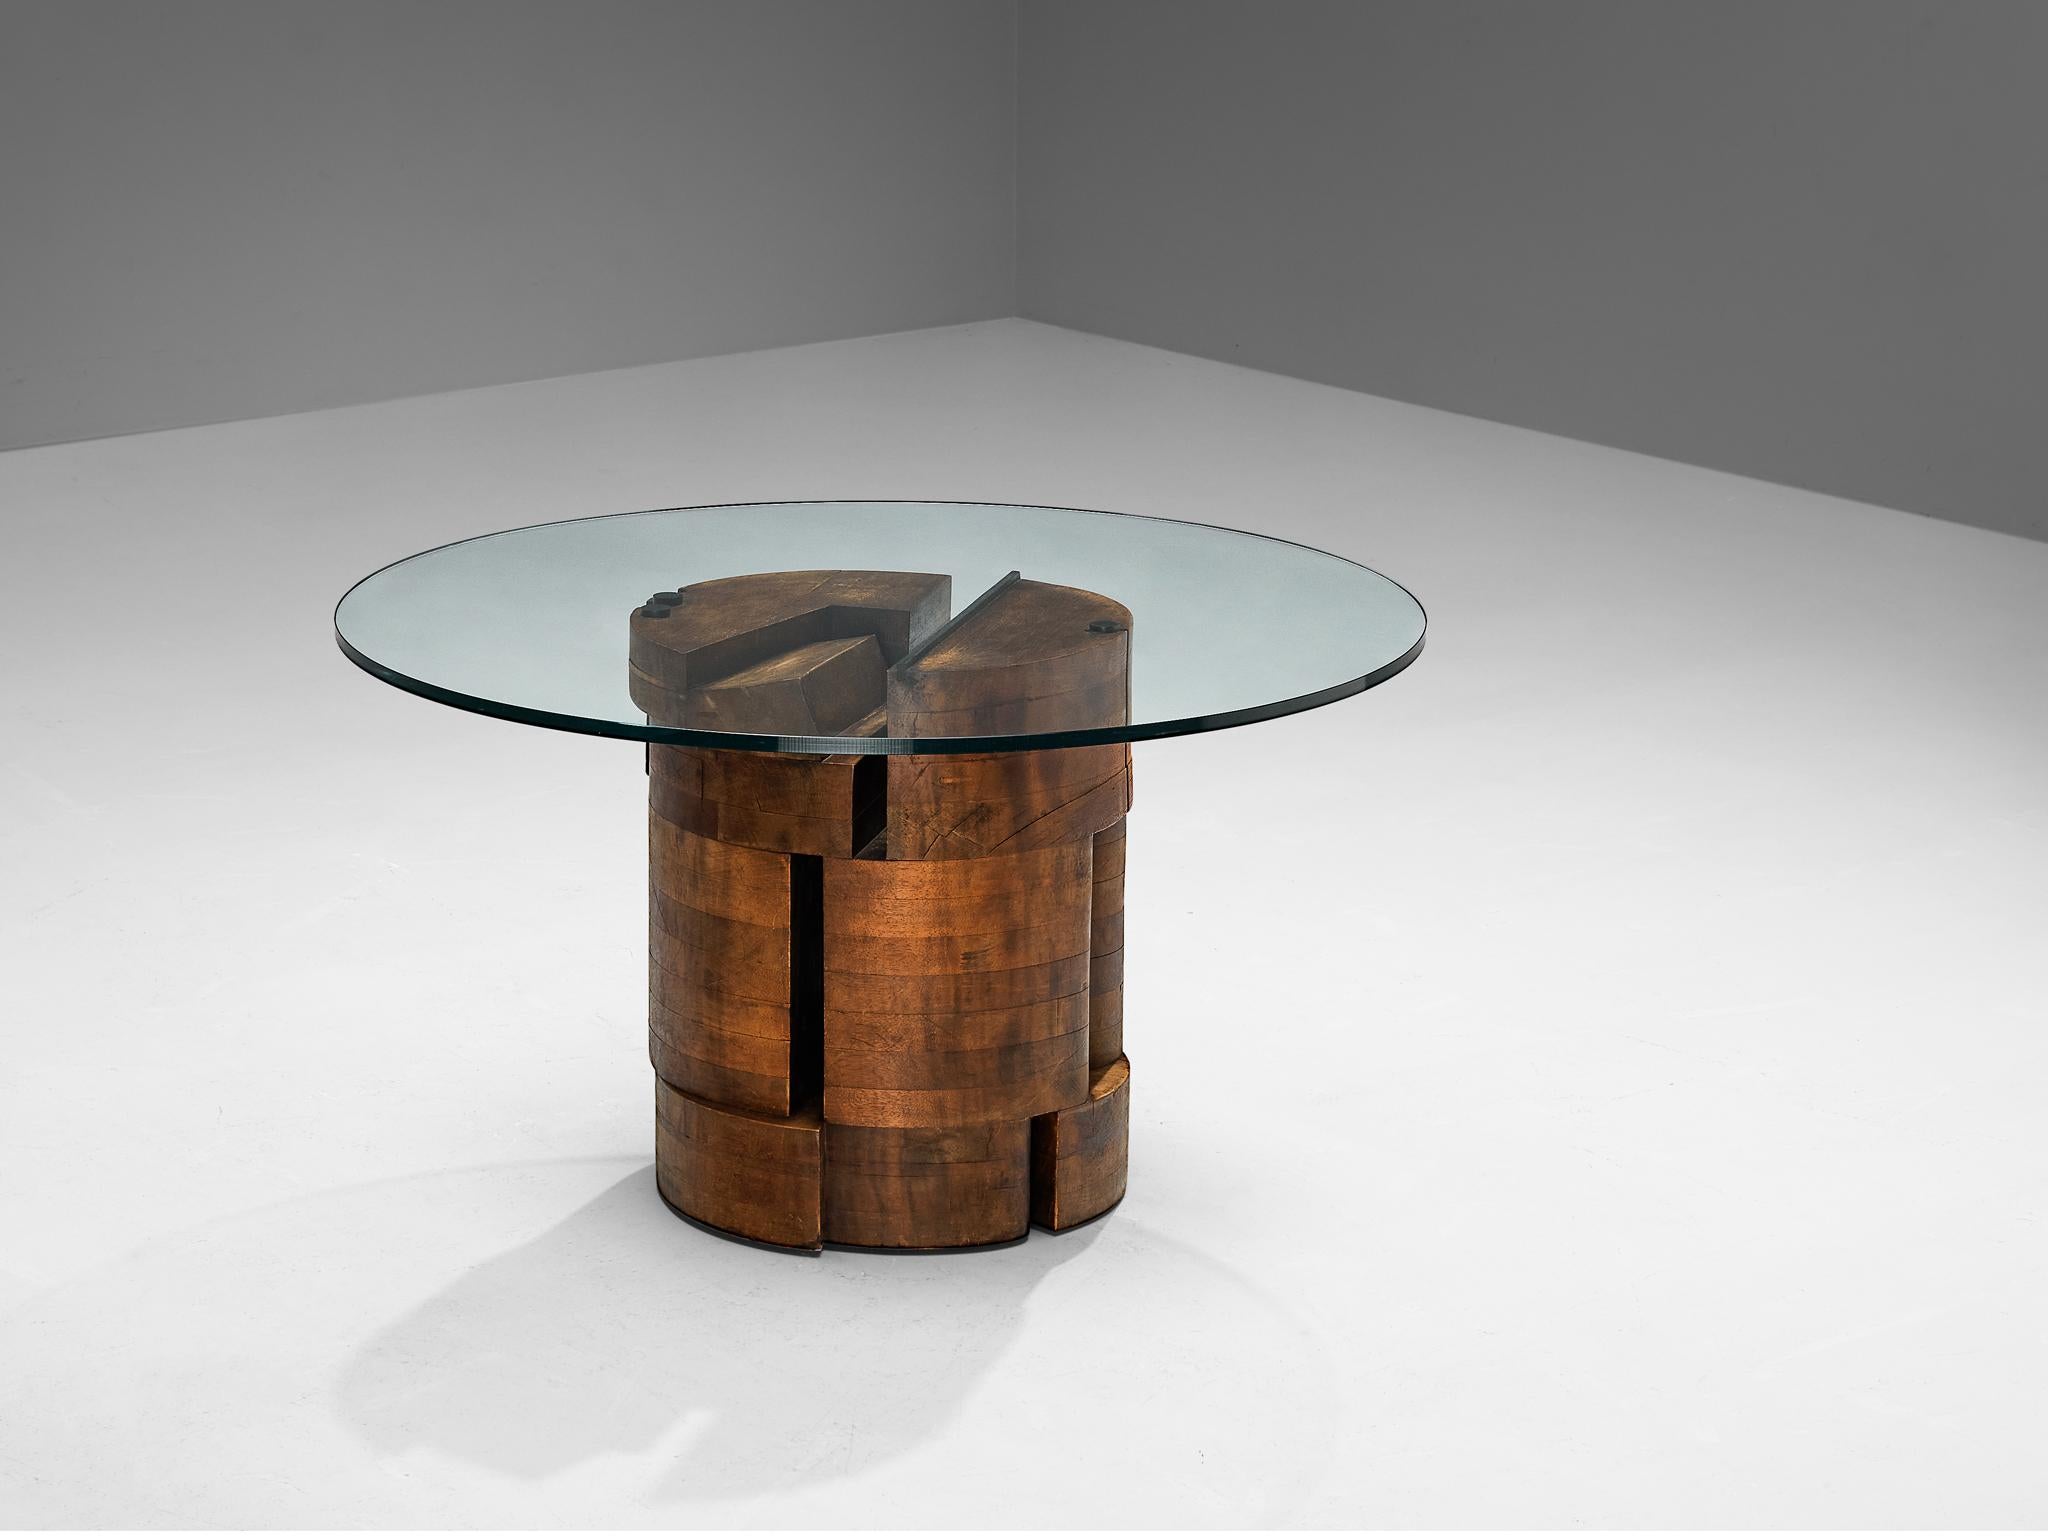 Nerone & Patuzzi for Gruppo NP2, dining table, walnut, glass, Italy, circa 1970

Conceived by the Italian designer duo Giovanni Ceccarelli and Giancarlo Patuzzi, this dining table undeniably stands as a piece of artistry in its own regard. It takes